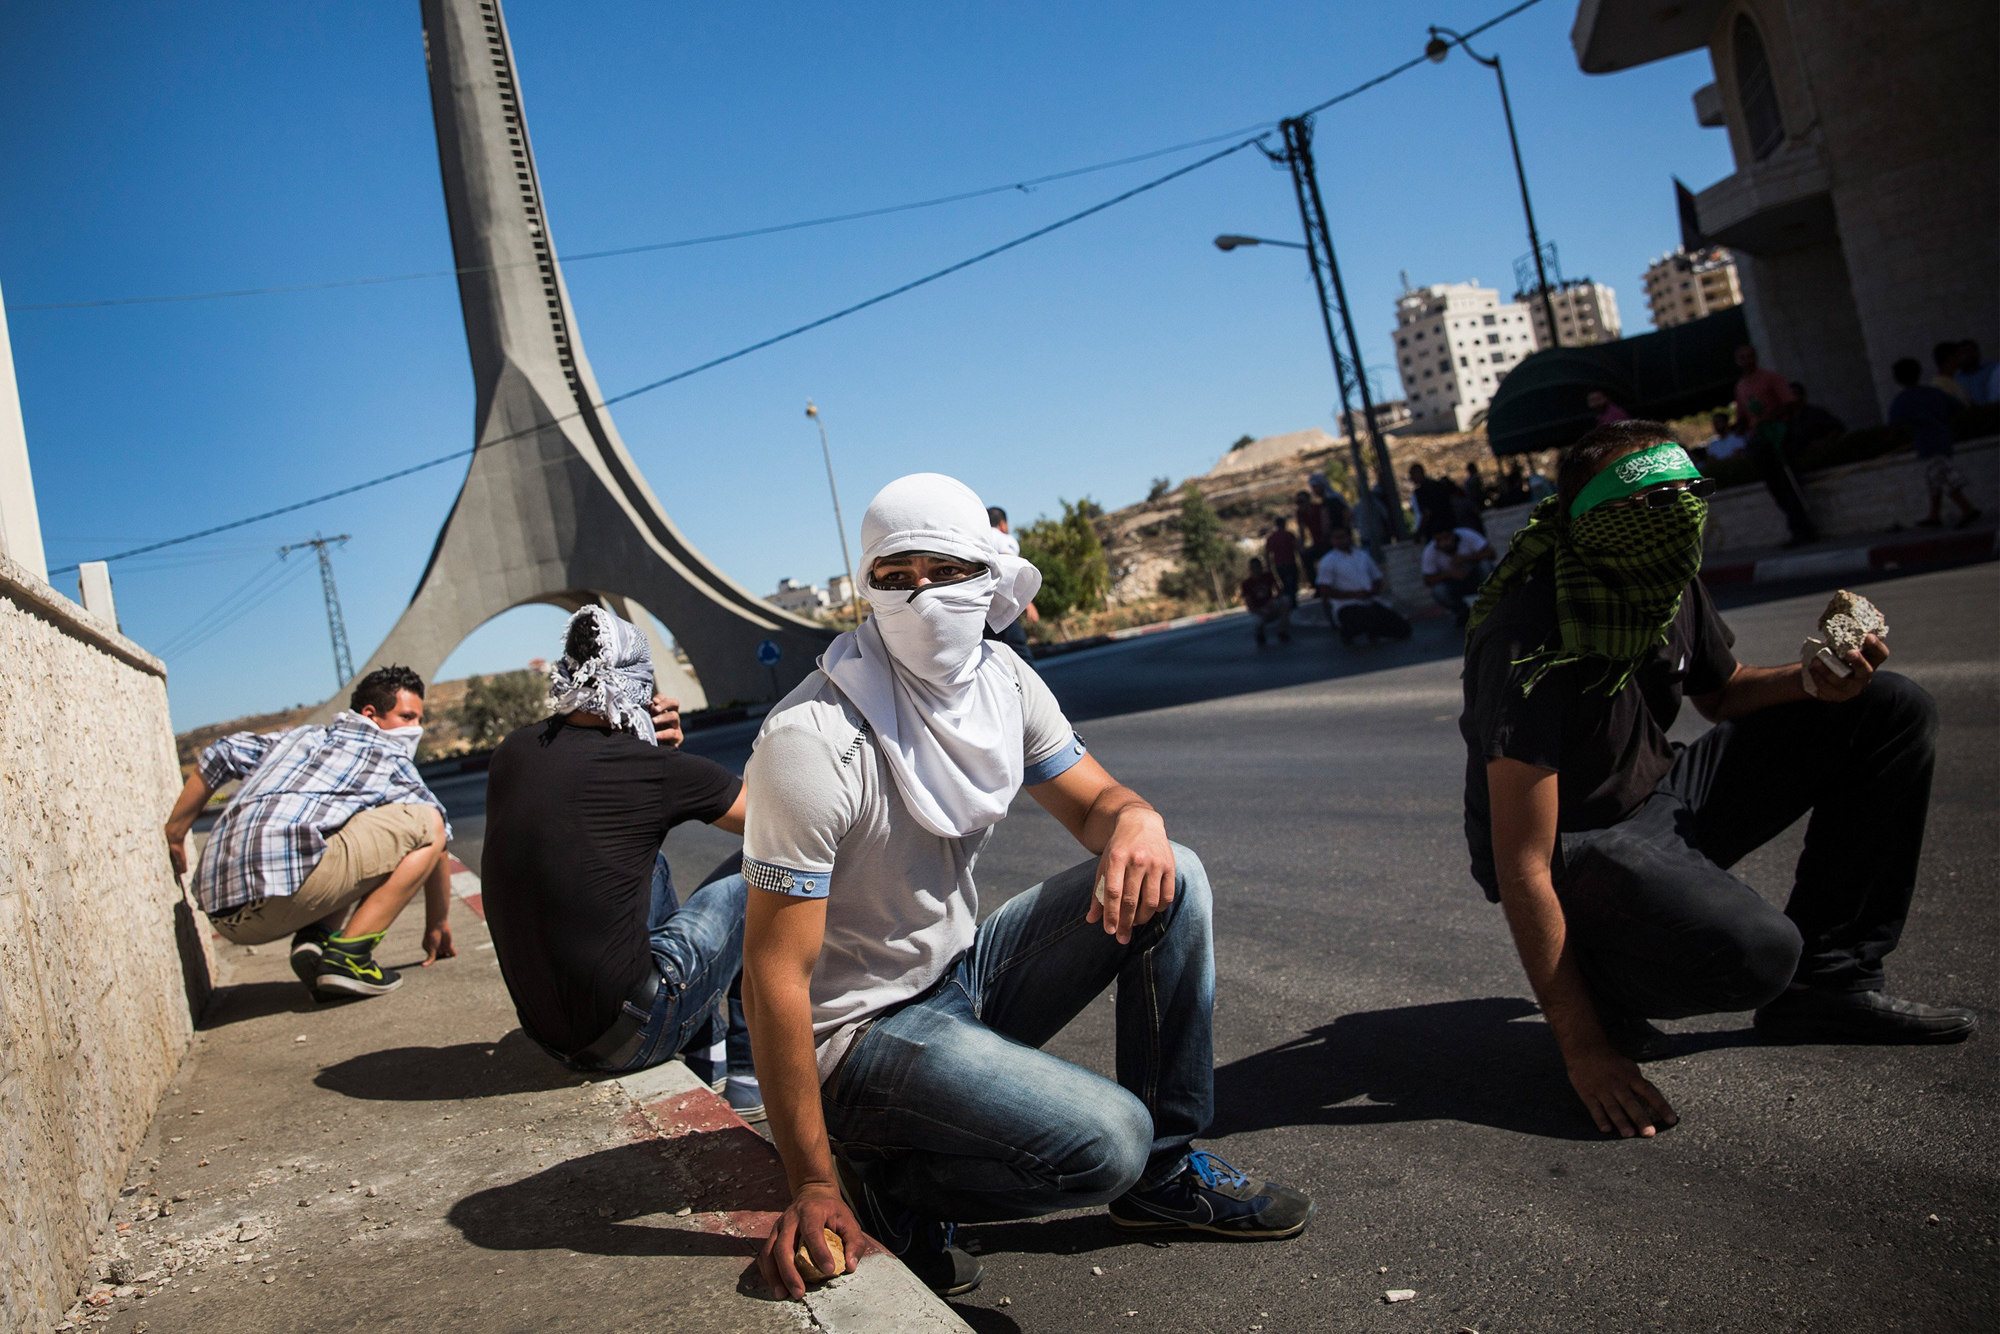 Palestinian supporters of Hamas take shelter while clashing with Israeli security forces on July 25, 2014 near Ramallah, West Bank.